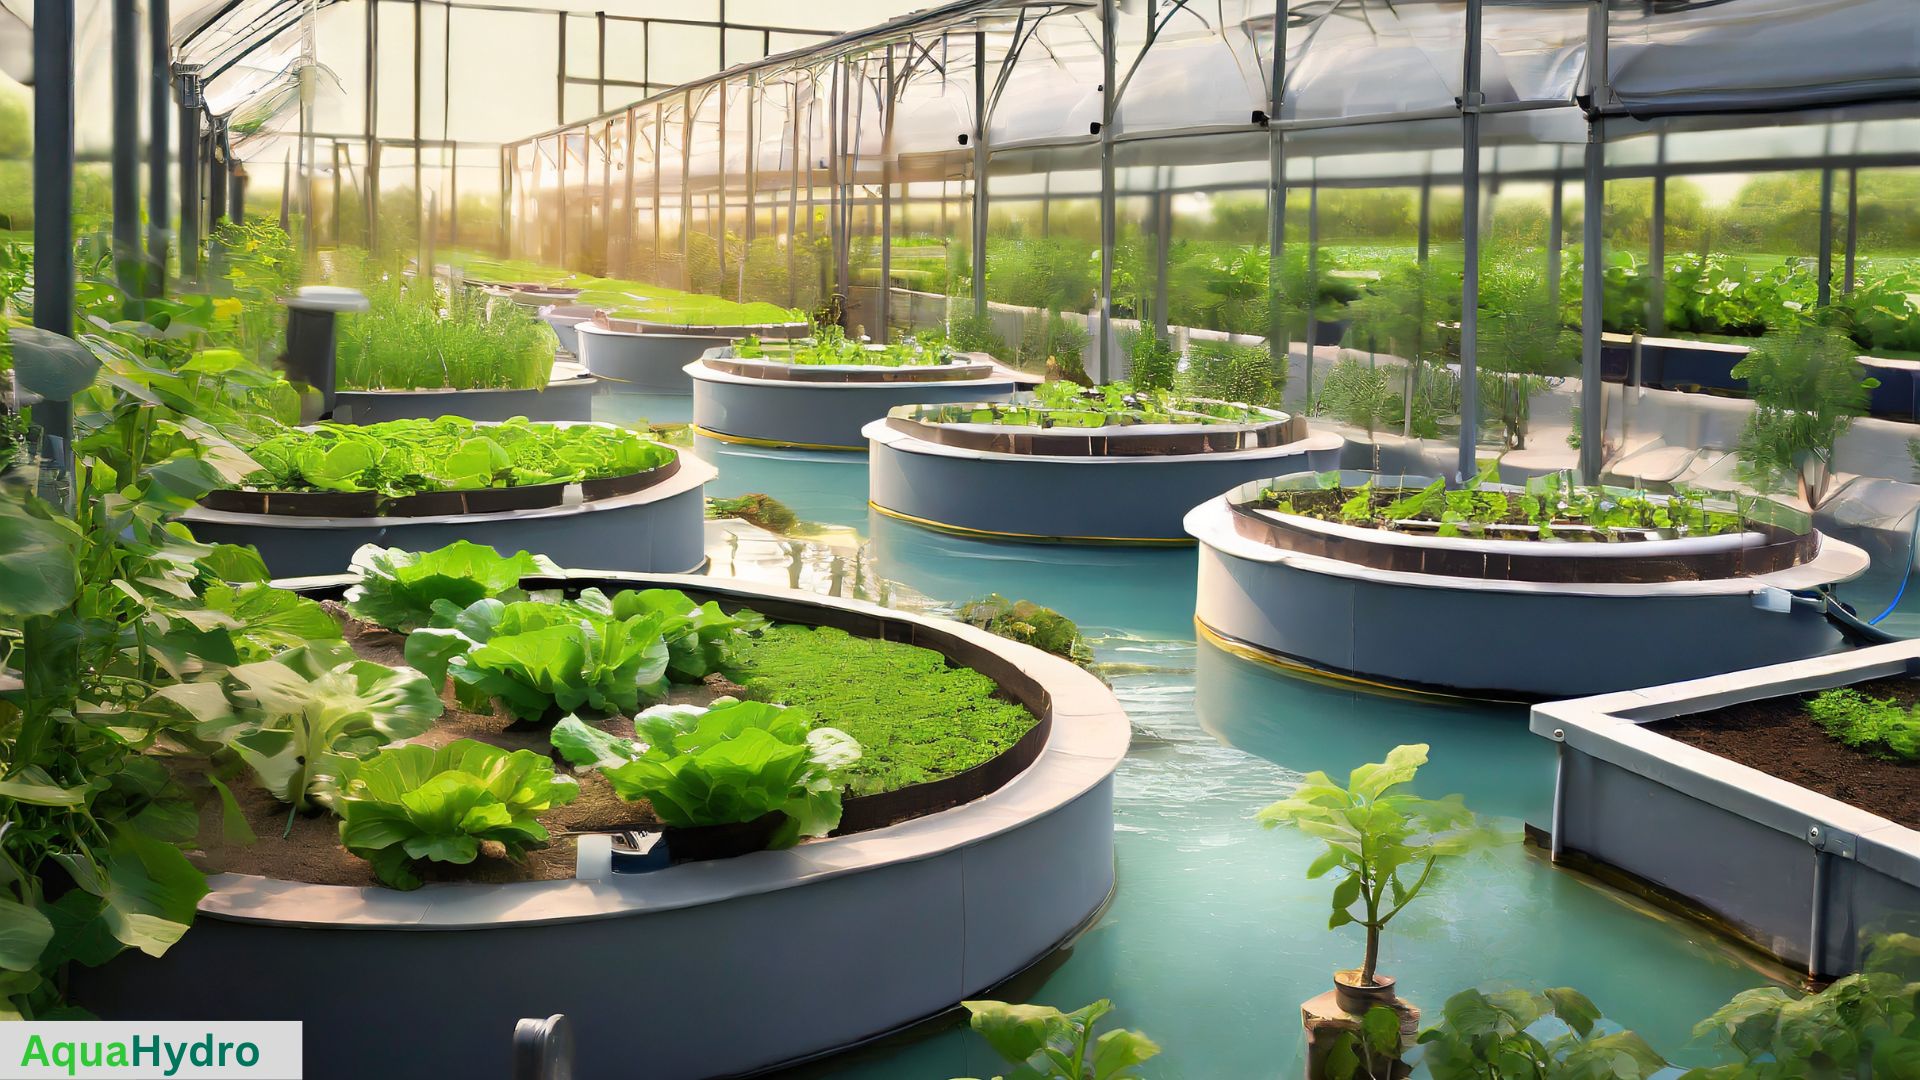 A thriving large-scale aquaponics system, with lush green plants and healthy fish, exemplifying the sustainable synergy between aquaculture and hydroponics described in the content